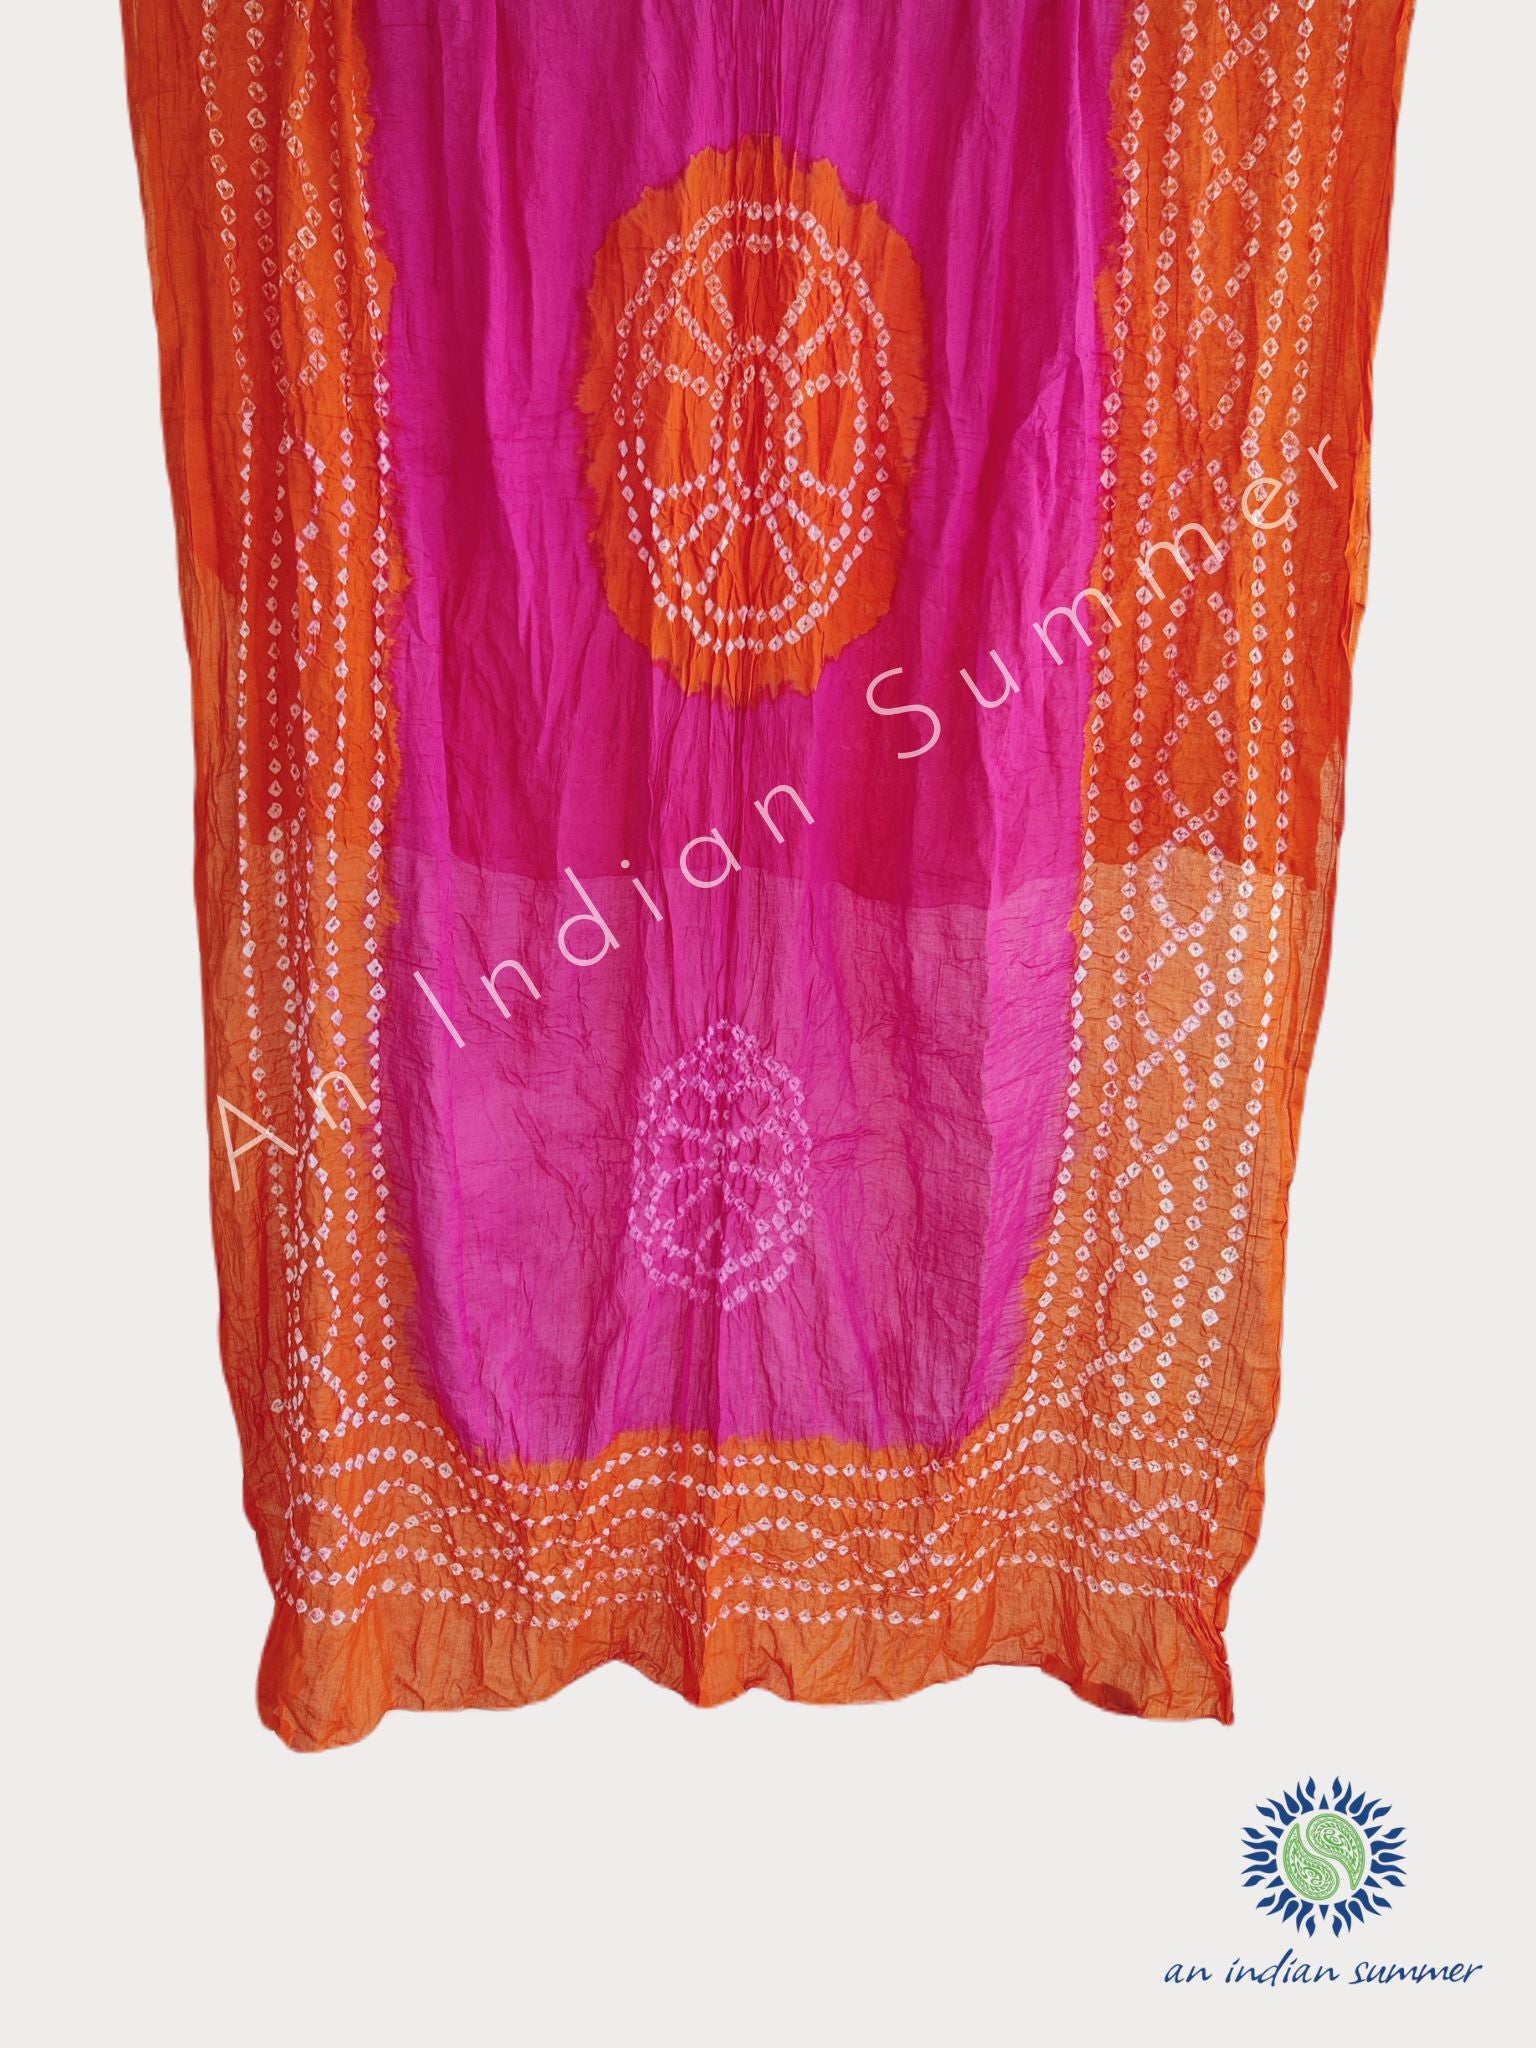 Pink & Orange | Contrast Bandhani Sarongs Pareos Shawls | Bandhej Tie Dye | Hand Tie-Dyed | Cotton Voile | An Indian Summer | Seasonless Timeless Sustainable Ethical Authentic Artisan Conscious Clothing Lifestyle Brand